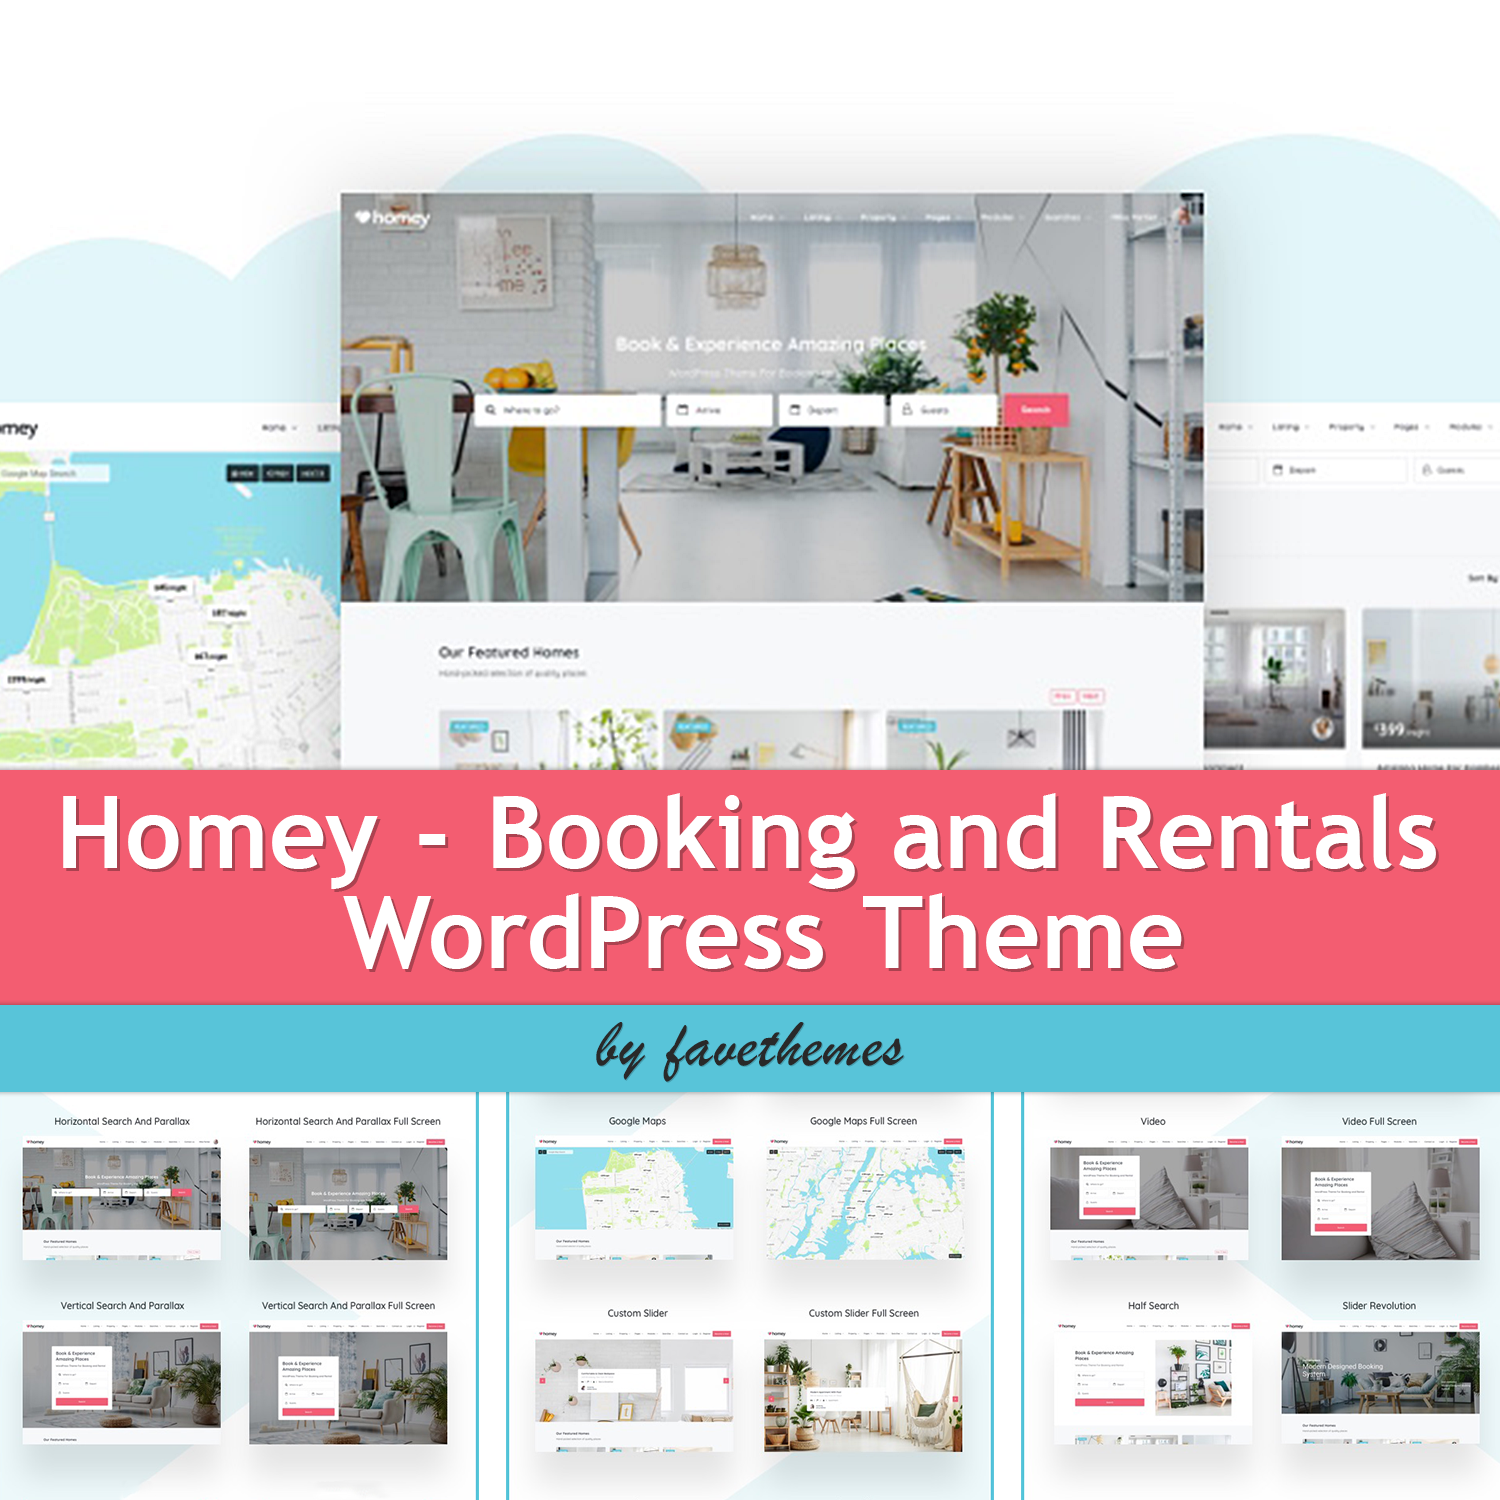 Images with homey booking and rentals wordpress theme.